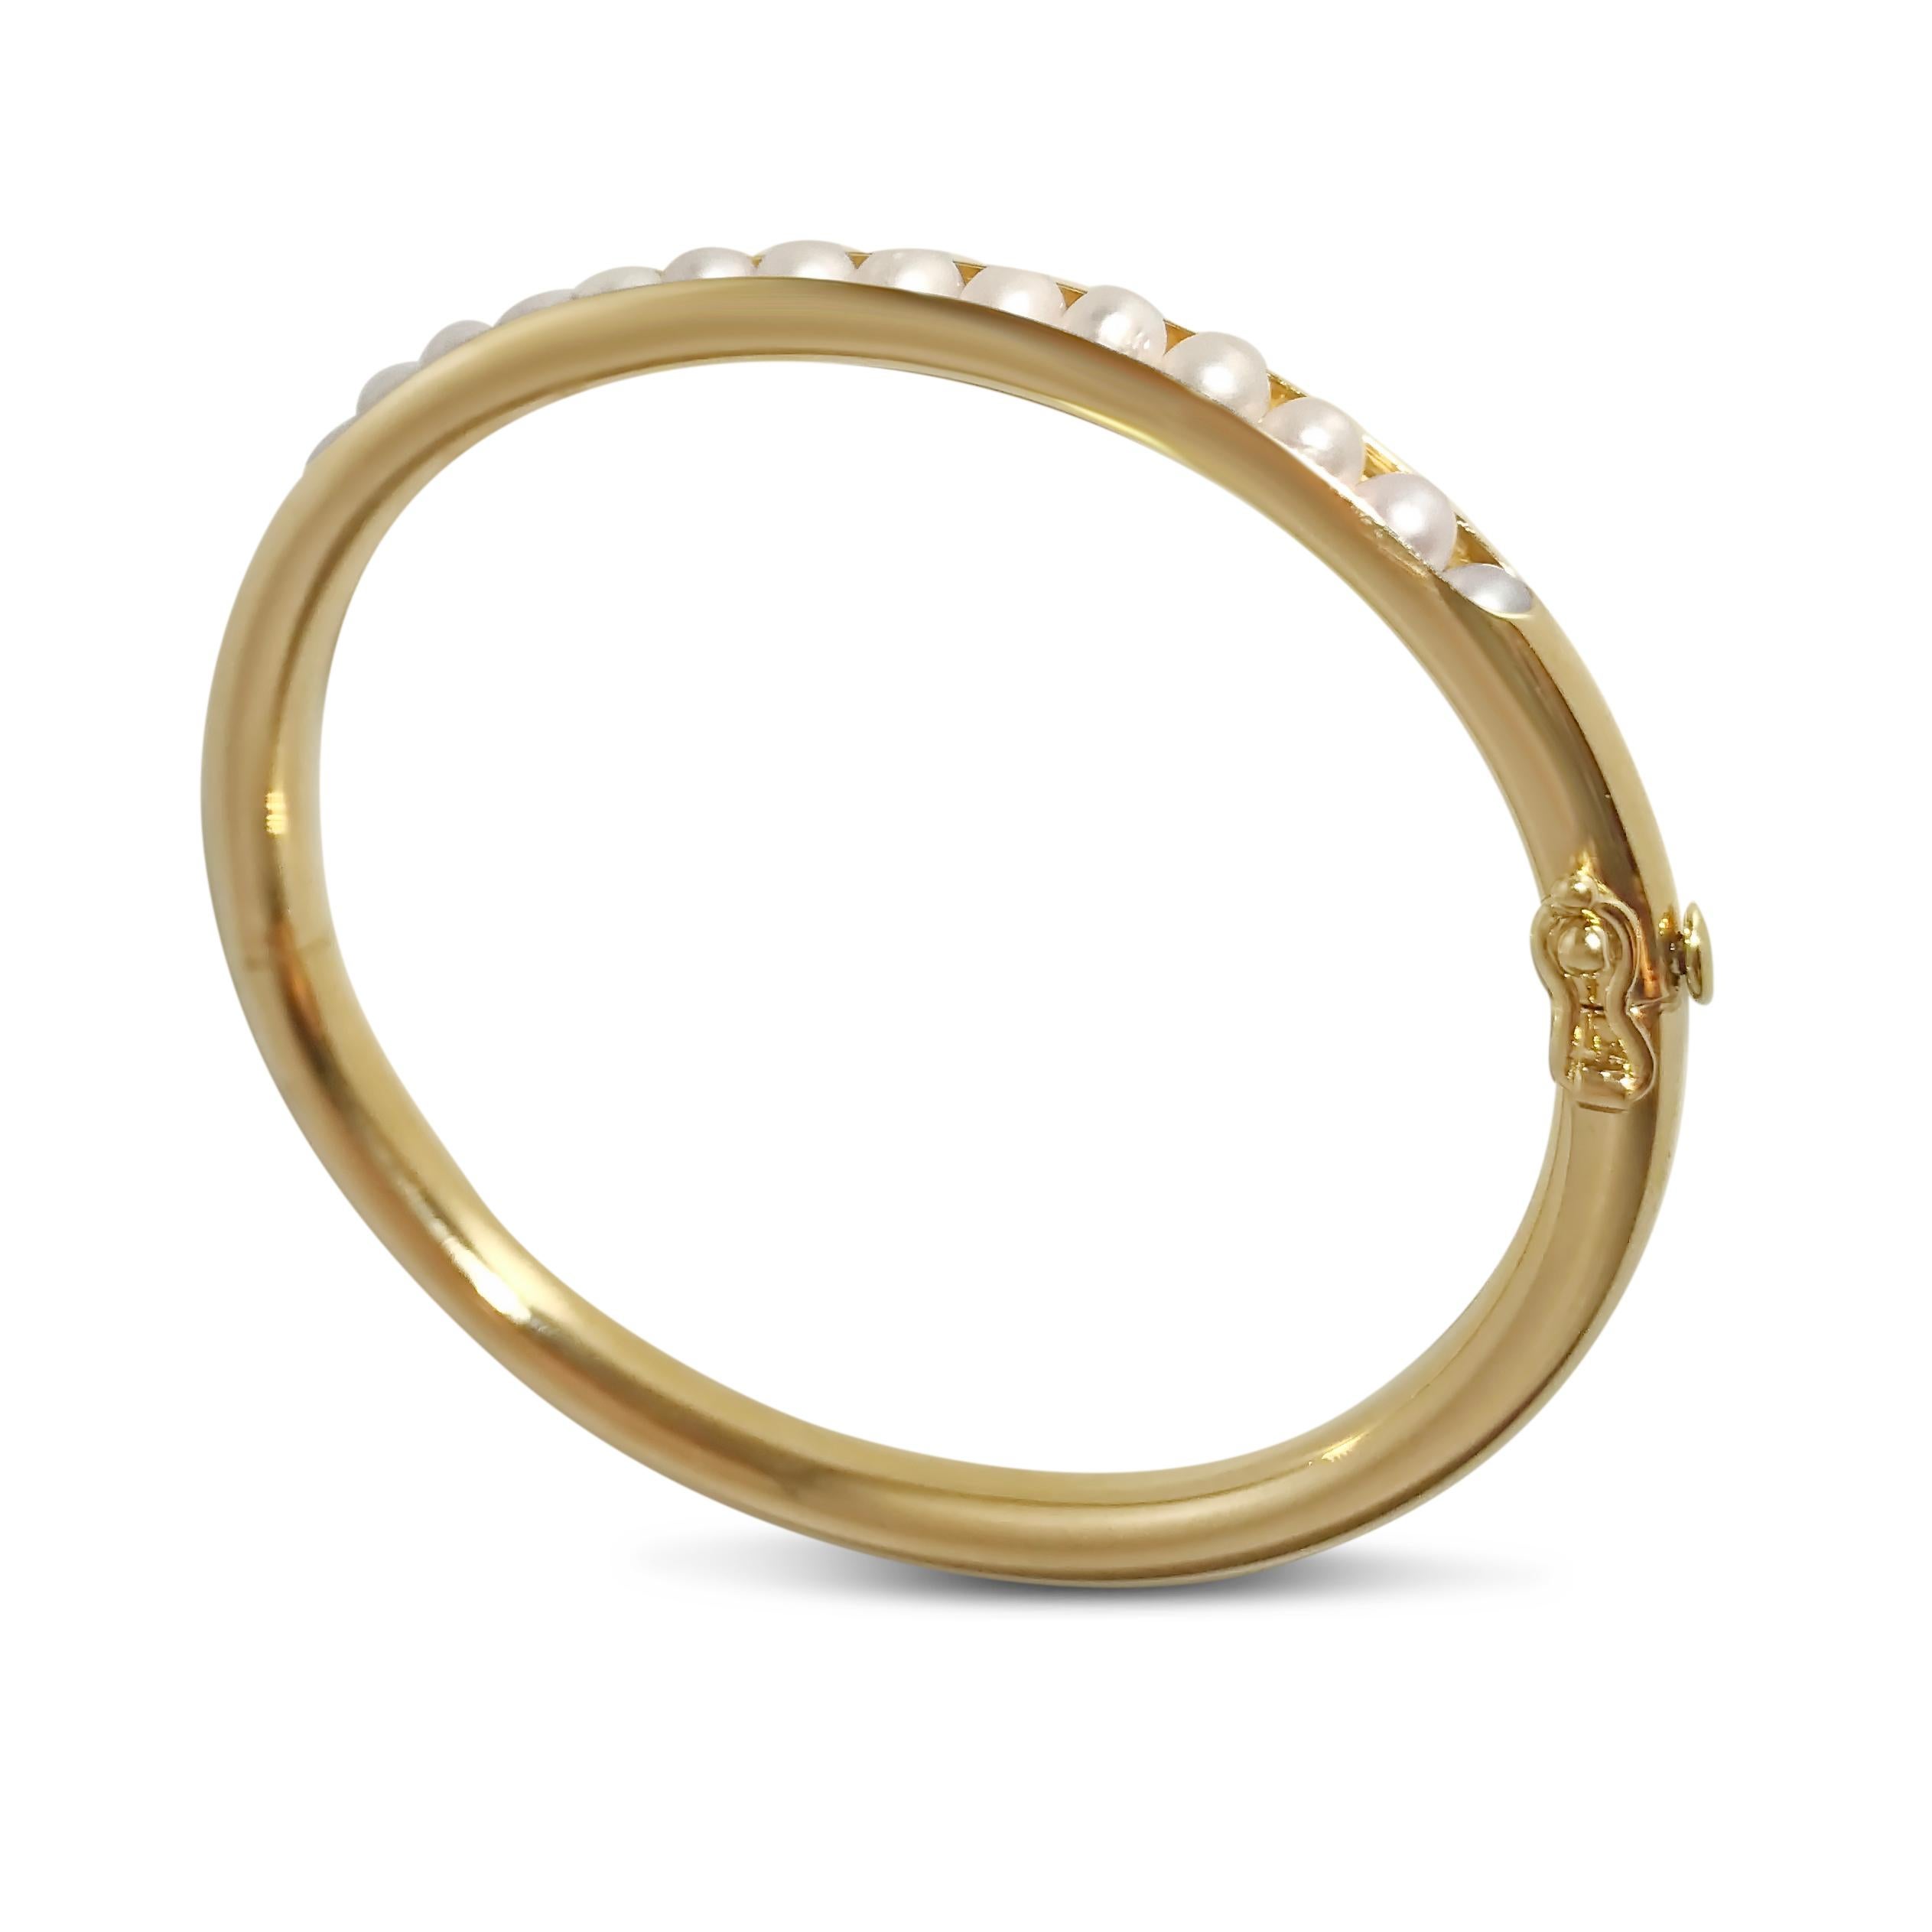 Modern meets classic with our gold bangle with inlayed semi-precious pearls. Our ‘T-Pearl’ 14K yellow gold oval-shaped bracelet is 3/16 inch in width and securely closes with a snap & hinge.

Specifications:
- Stone(s): Pearls
- Shape: Oval
-